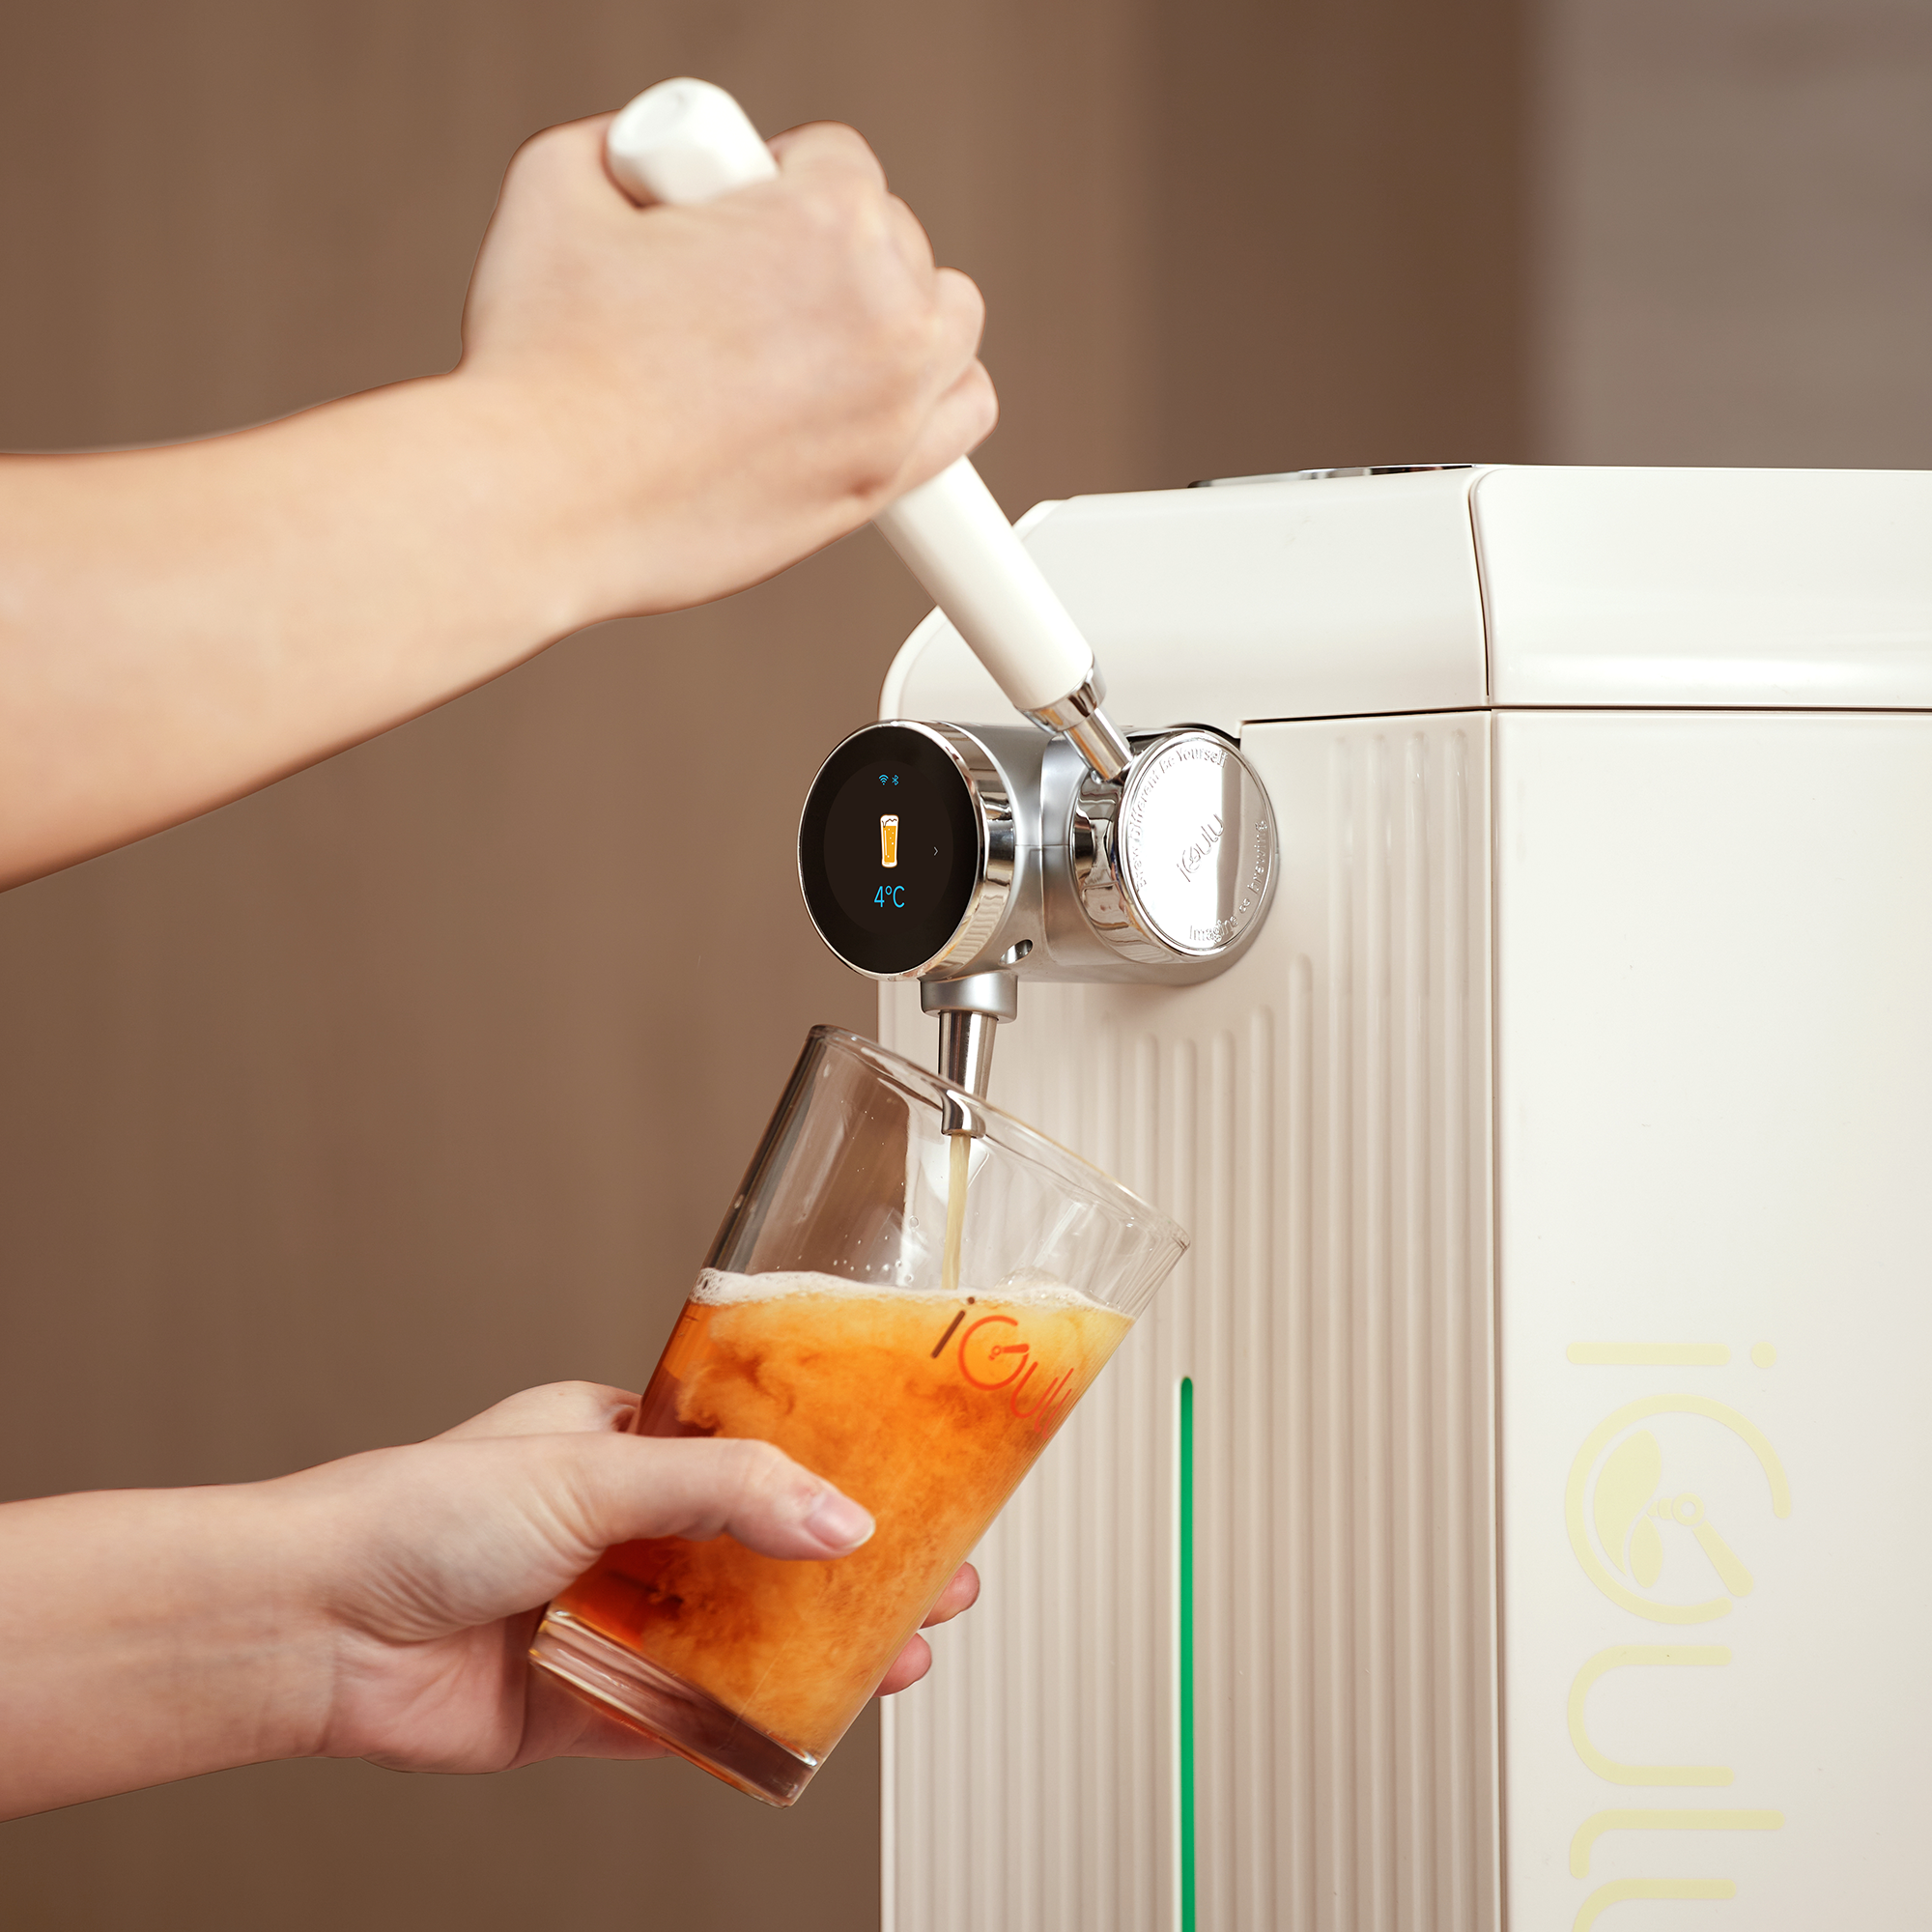 All in One Automated Home Brewing Machine - F1 Creamy White